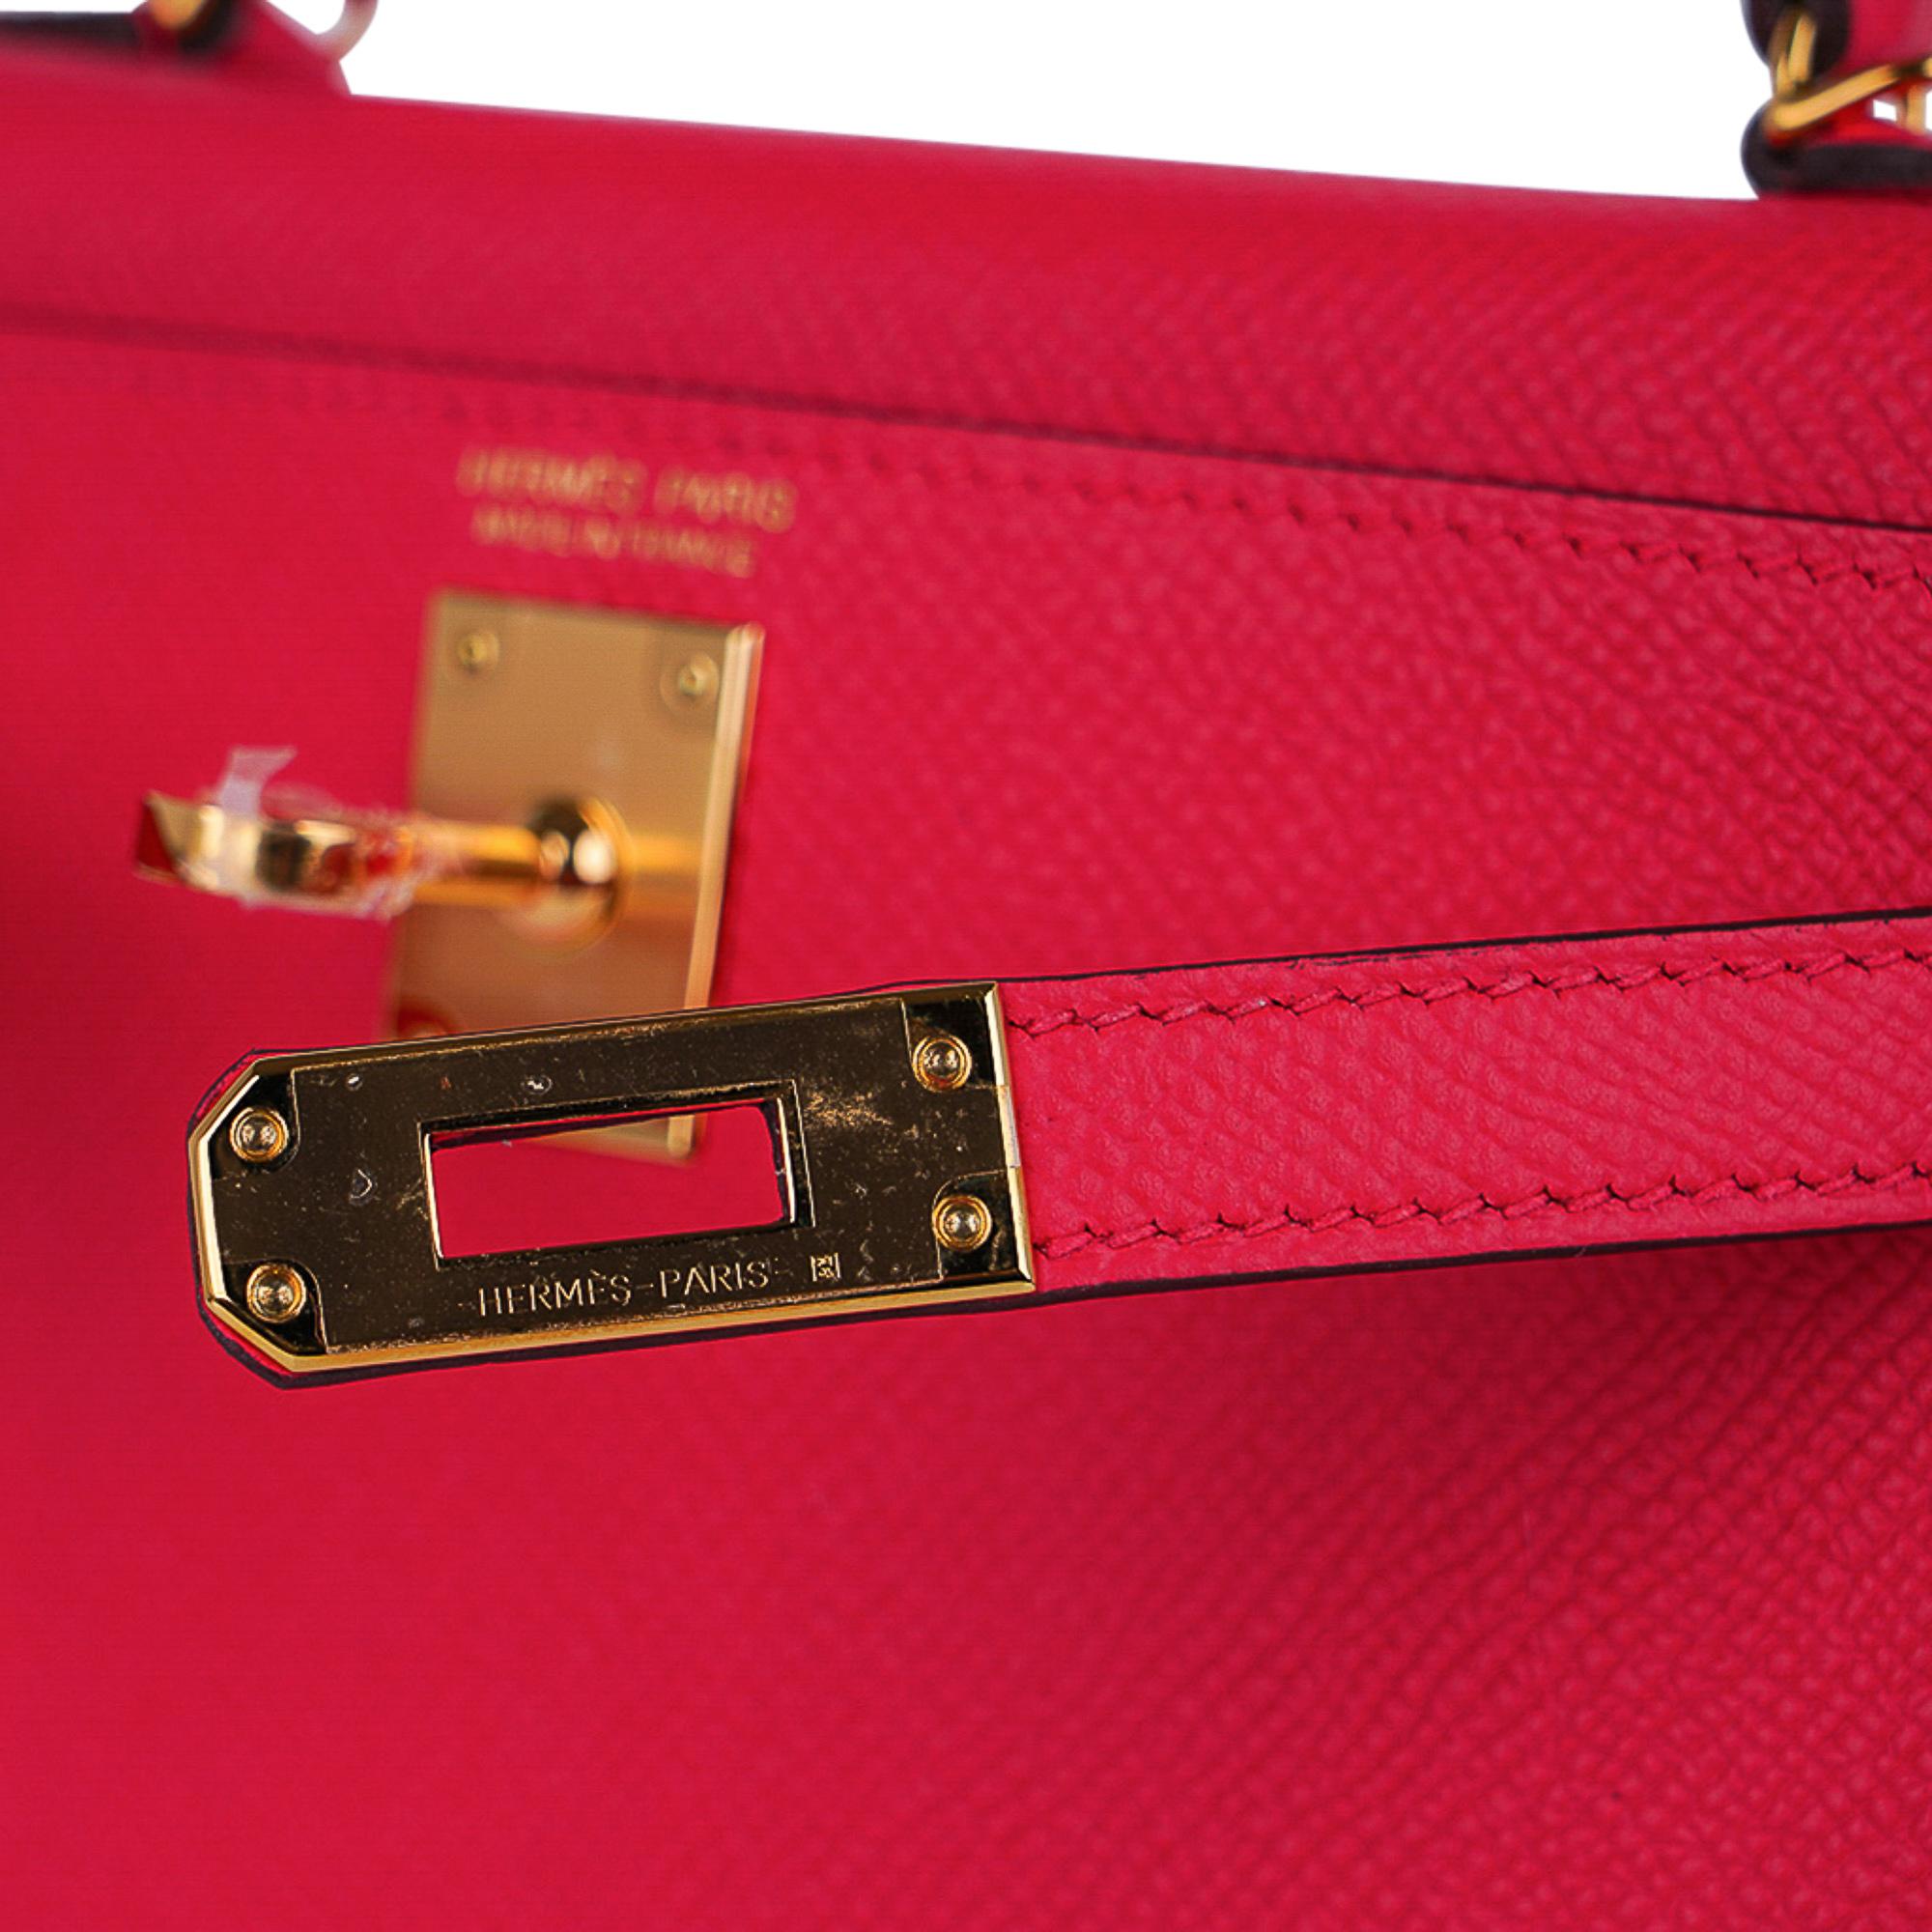 Mightychic offers a guaranteed authentic Hermes Kelly 20 Sellier bag.
Coveted and rare to find this Kelly bag is featured in vivid Rose Extreme Gold Epsom leather with gold hardware.
Carry by hand, shoulder or cross body.
Divine size for day to